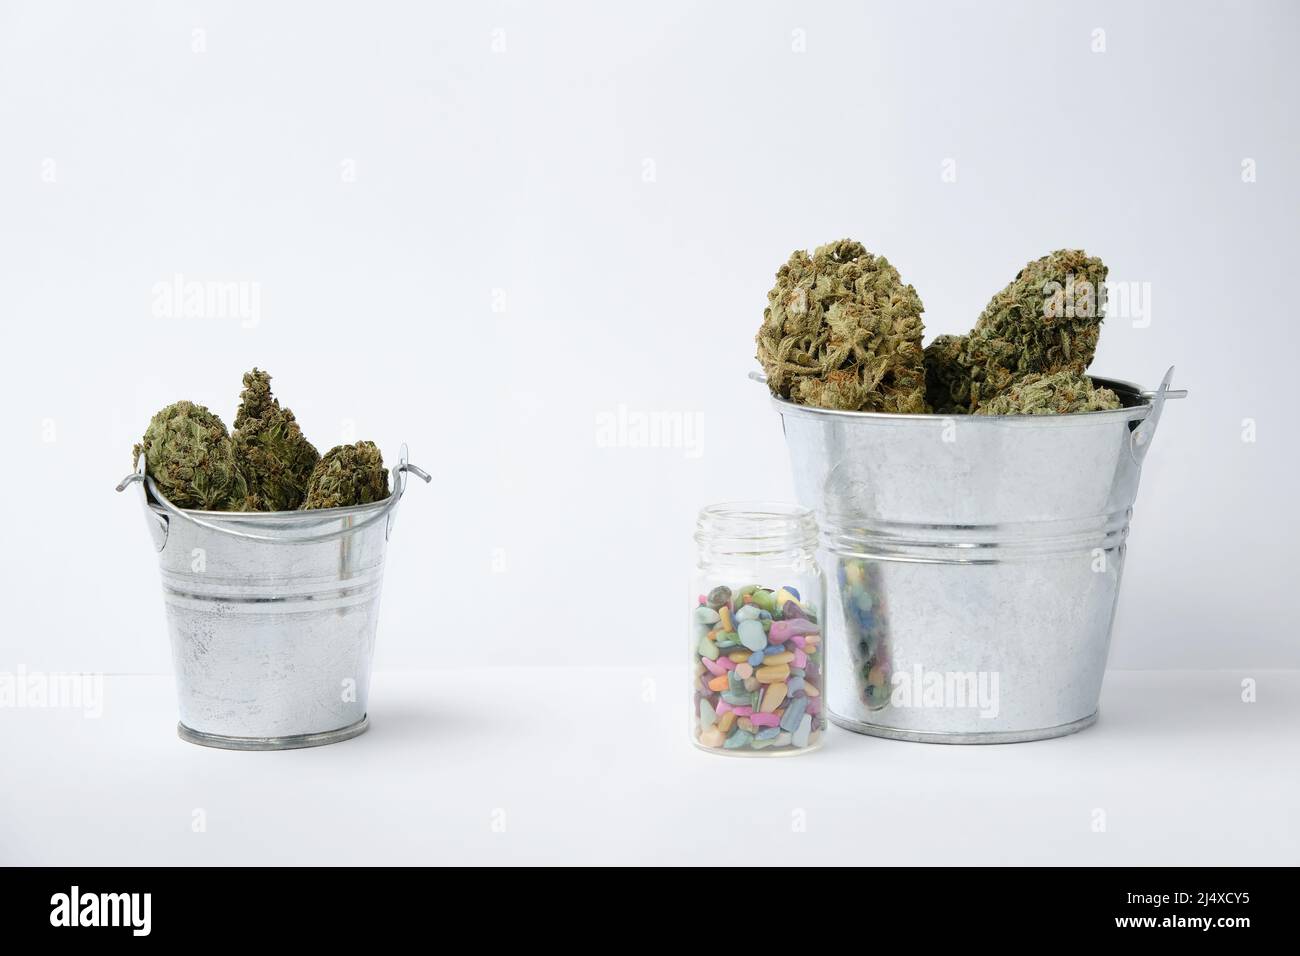 Hemp growing. Dry marijuana in buckets and fertilizer isolated on white background. Harvest concept. Productivity in cannabis industry. Stock Photo